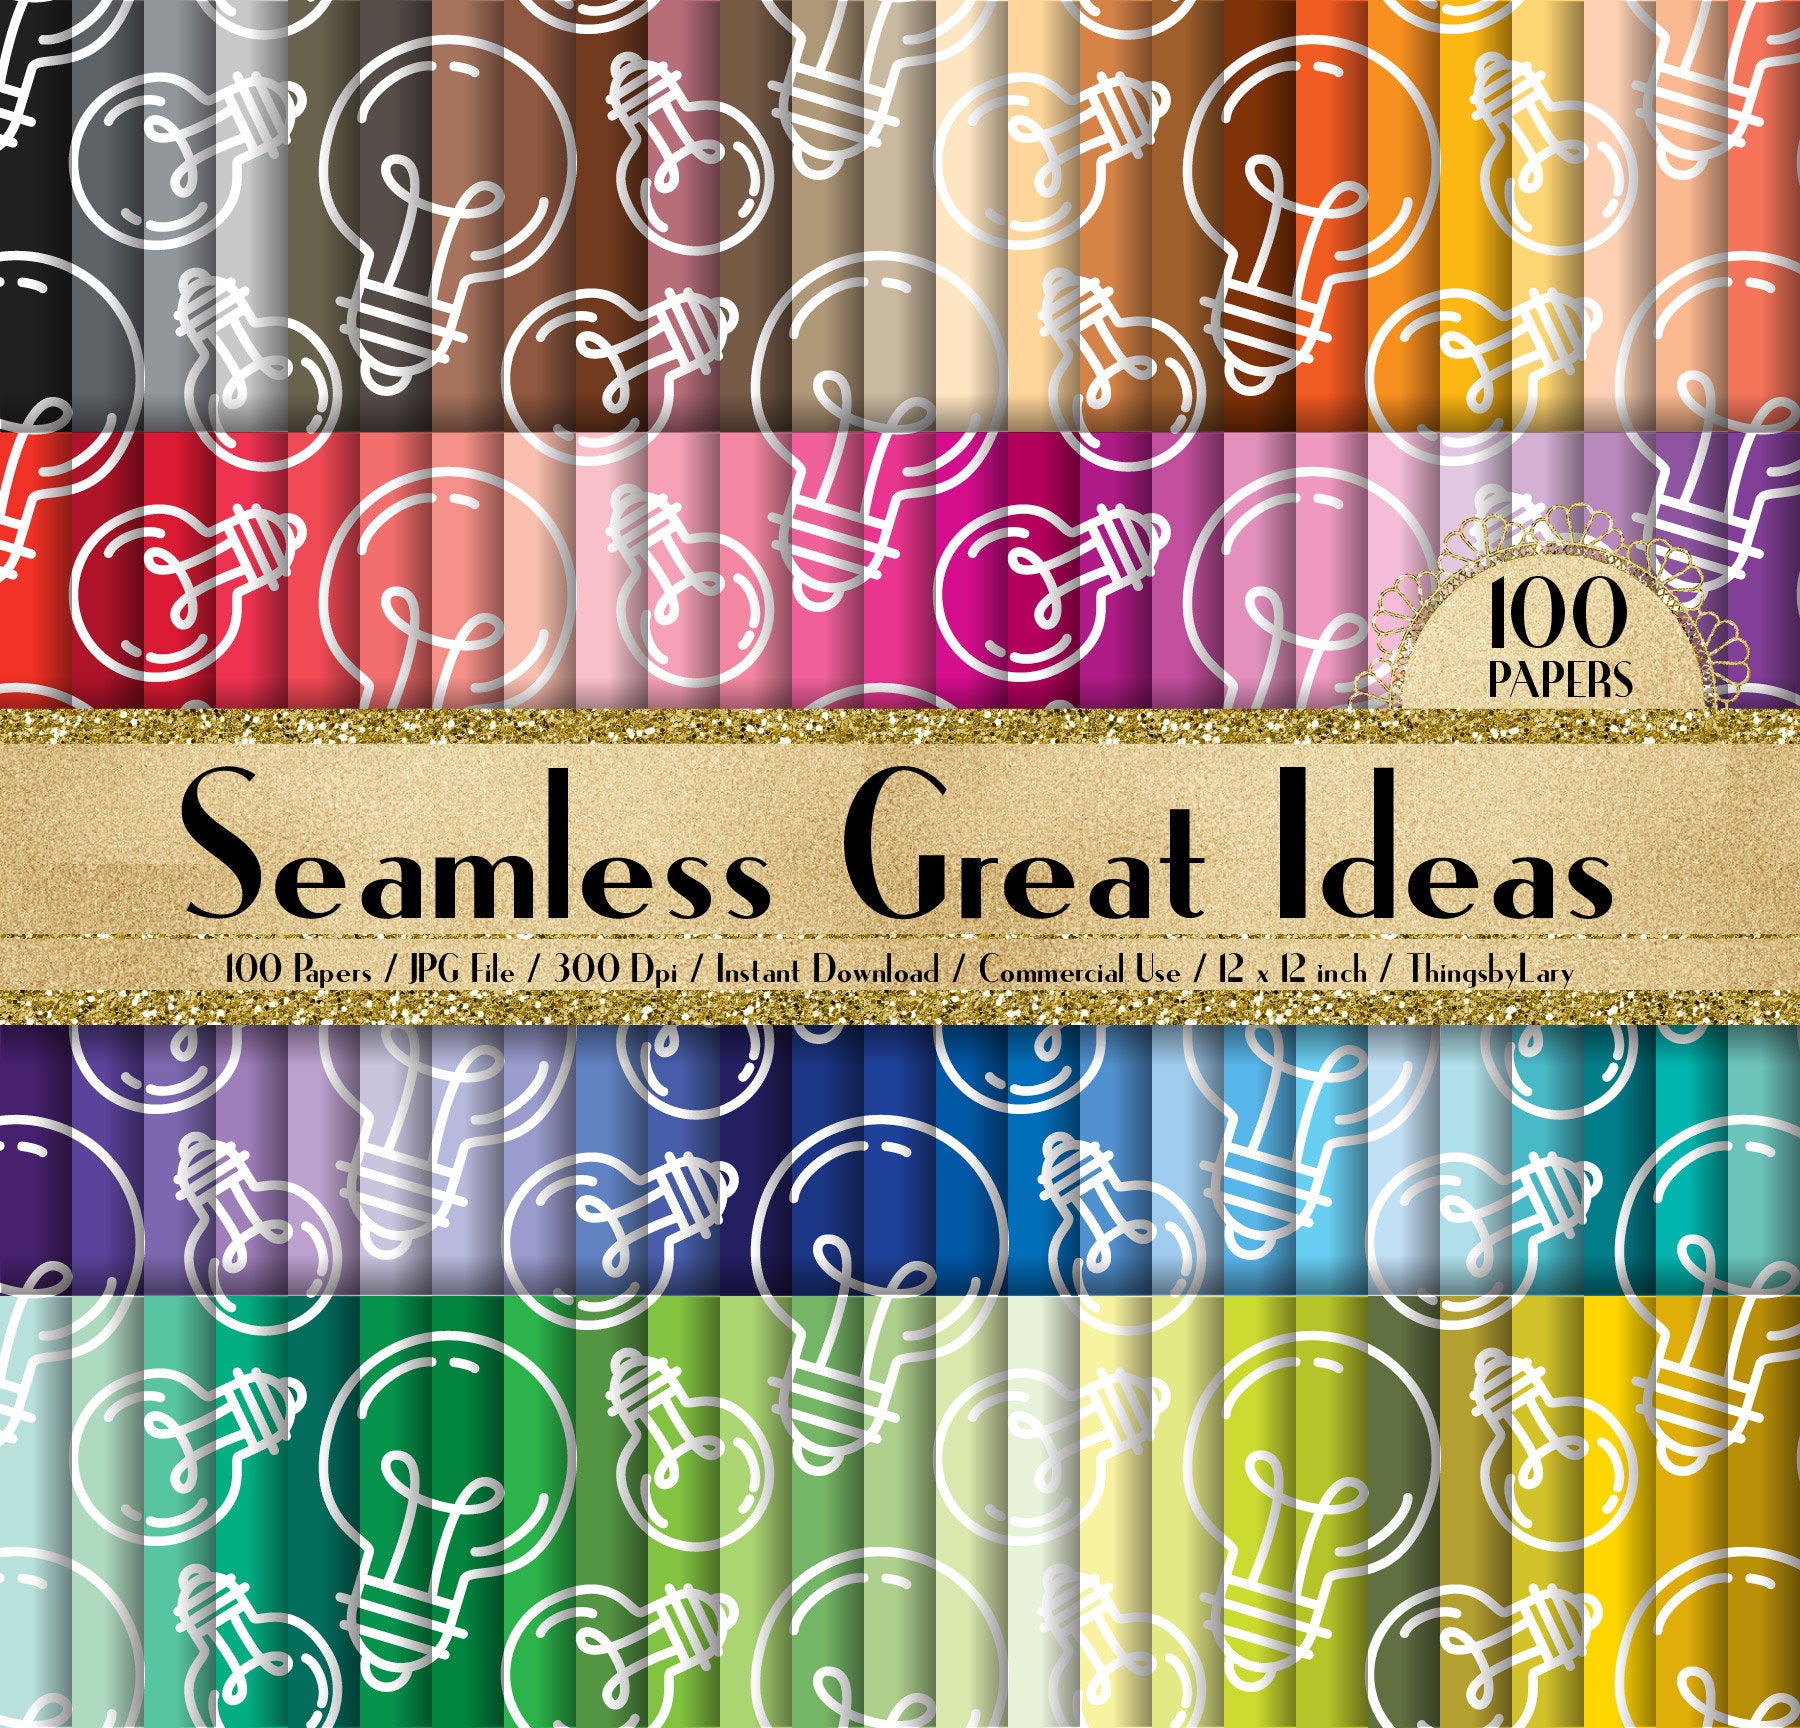 100 Seamless Great Idea Pattern Papers 12 inch 300 Dpi Instant Download Commercial Use, Planner Paper, Scrapbooking Office Kit, Seamless